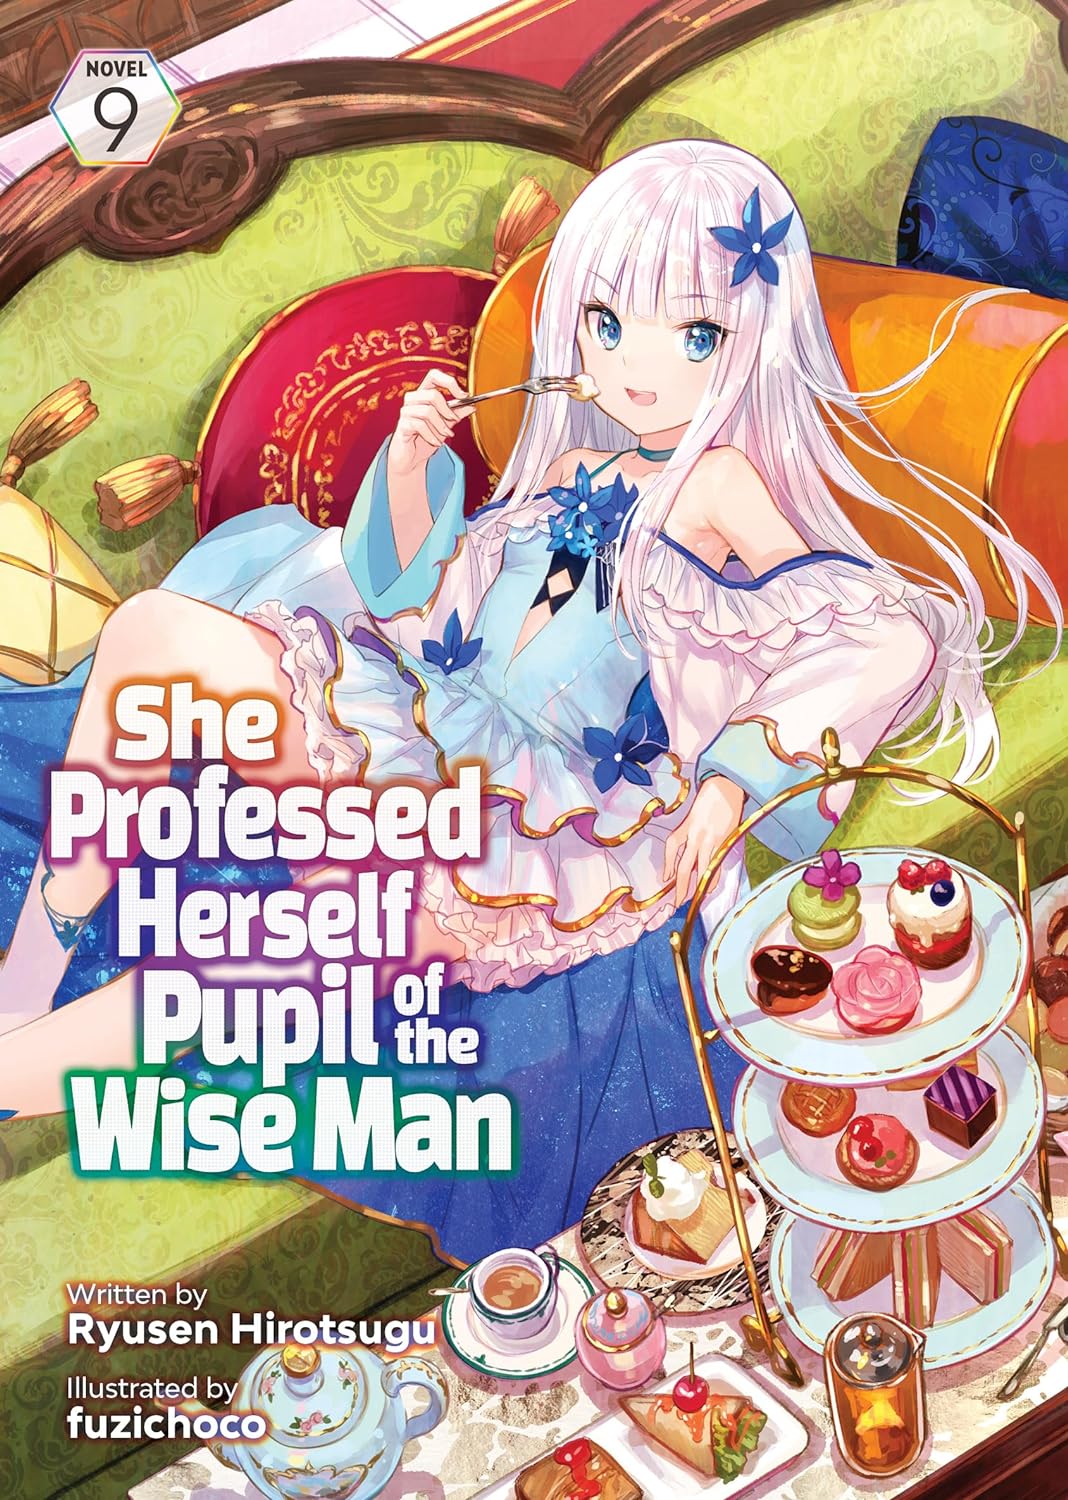 (30/01/2023) She Professed Herself Pupil of the Wise Man (Light Novel) Vol. 09